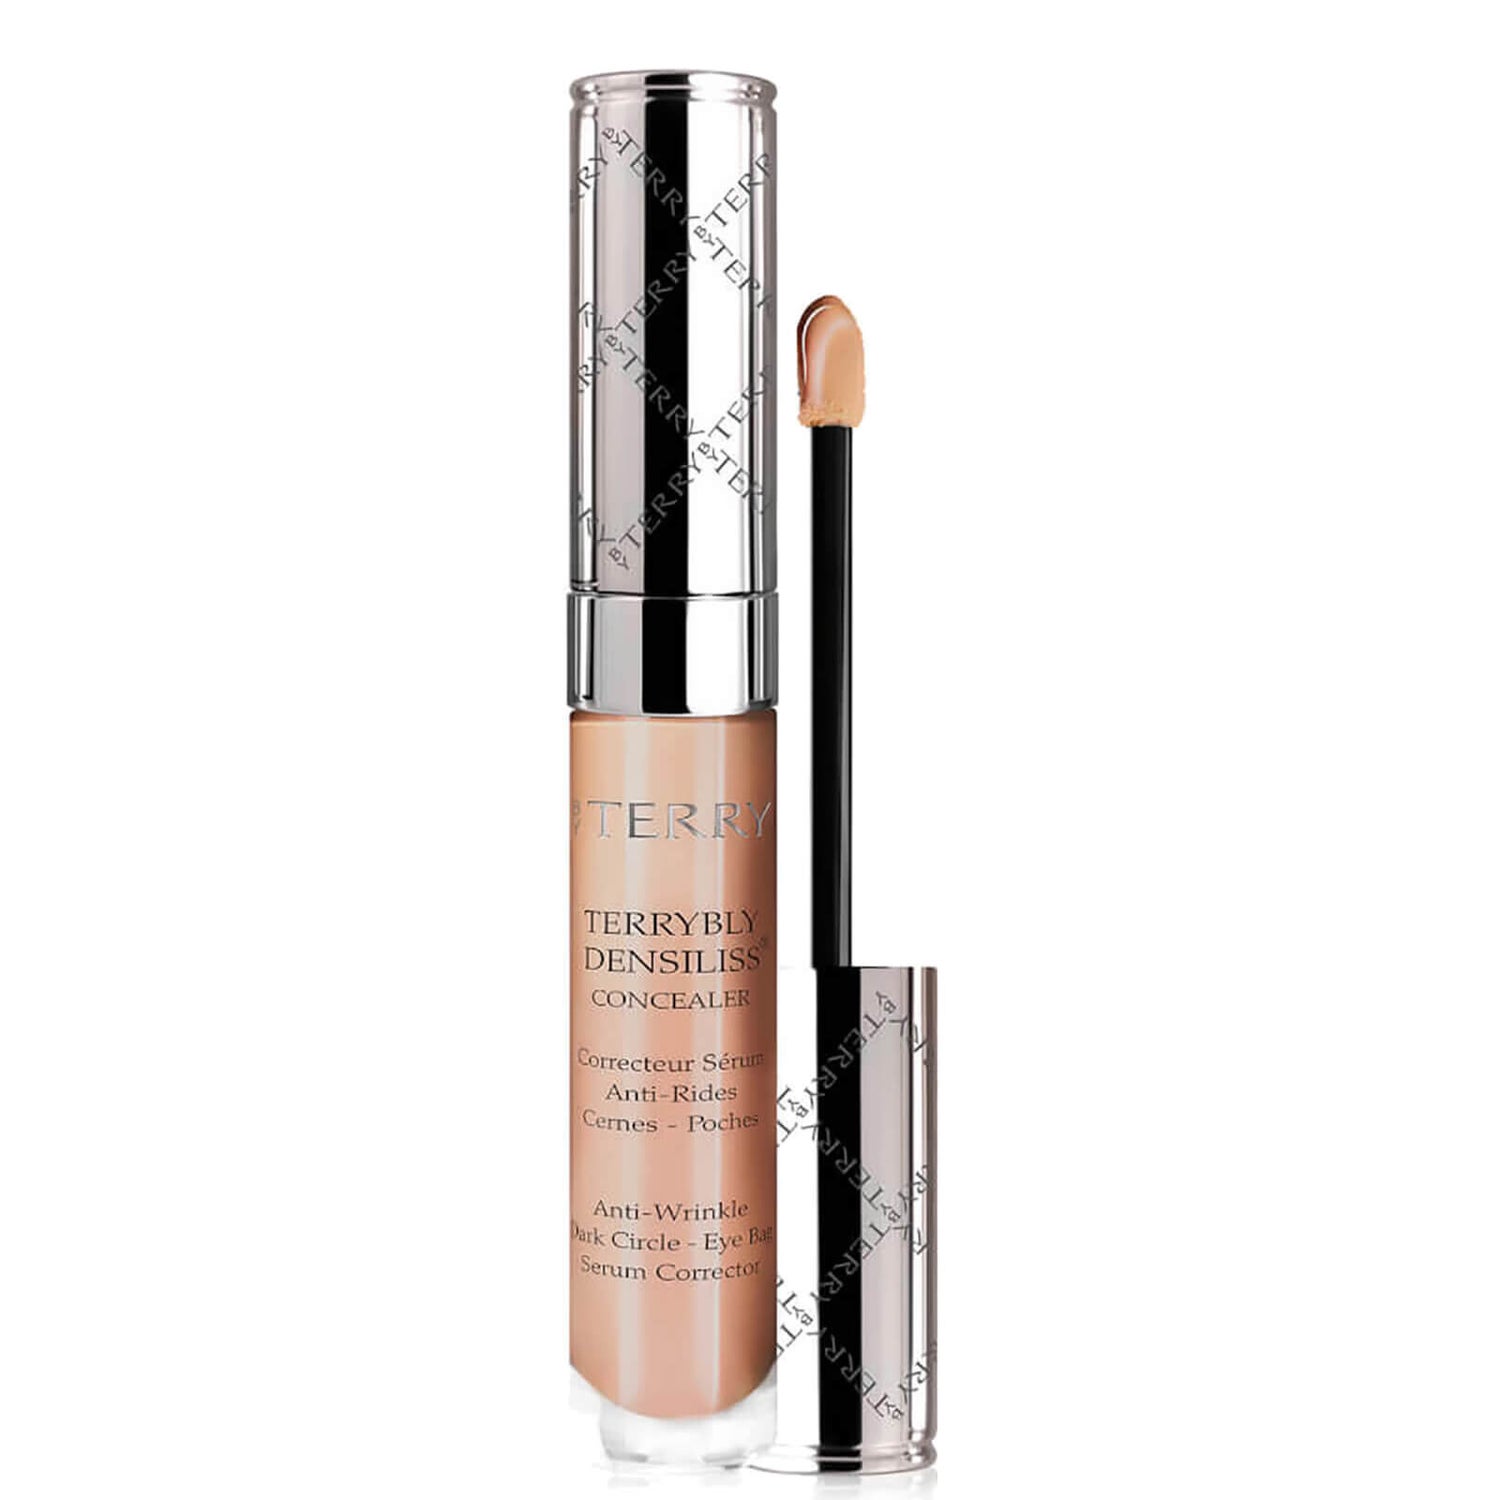 By Terry Terrybly Densiliss Concealer - 6 - Sienna Copper (7 ml.)